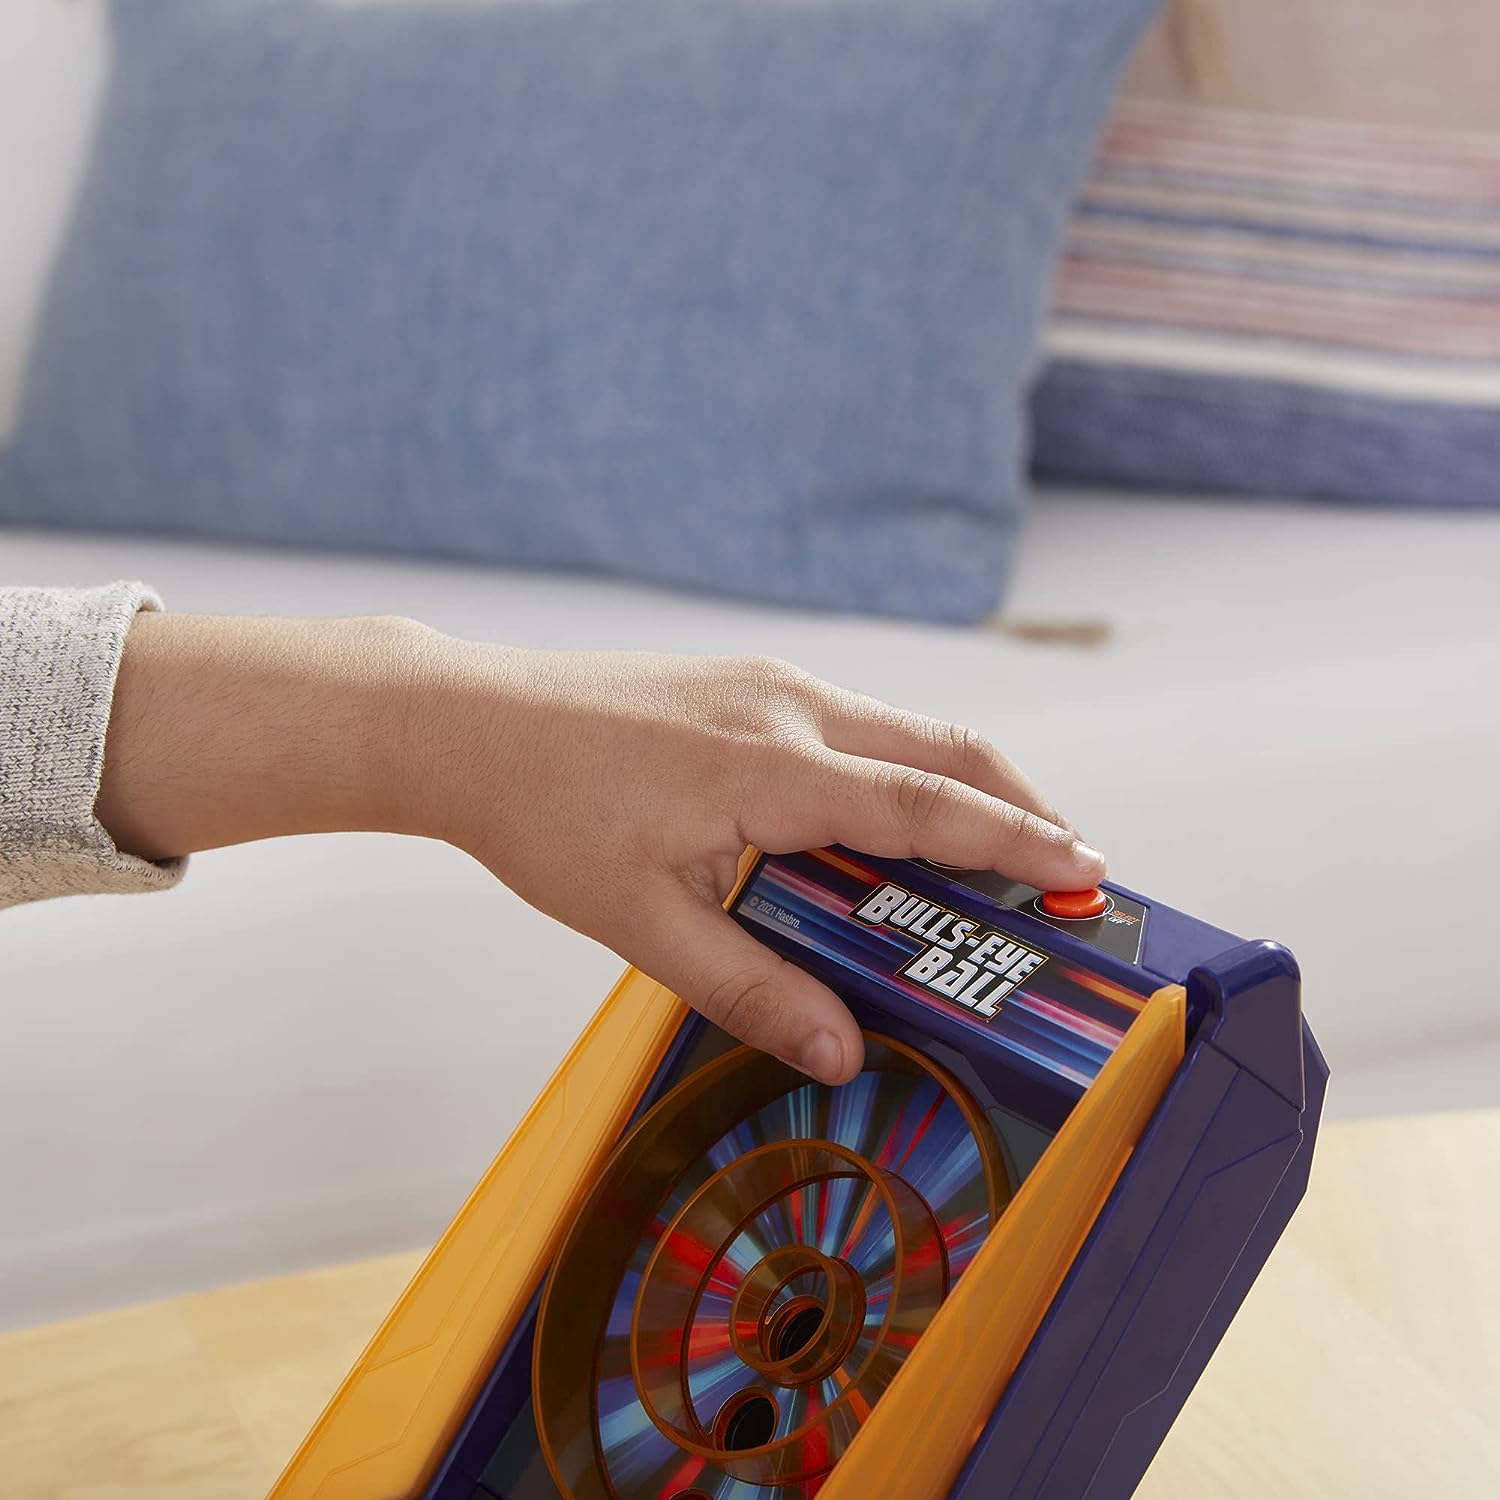 Hasbro Gaming Bulls-Eye Ball Game for Kids Ages 8 and Up, Active Electronic Game for 1 or More Players, Features 5 Exciting Modes